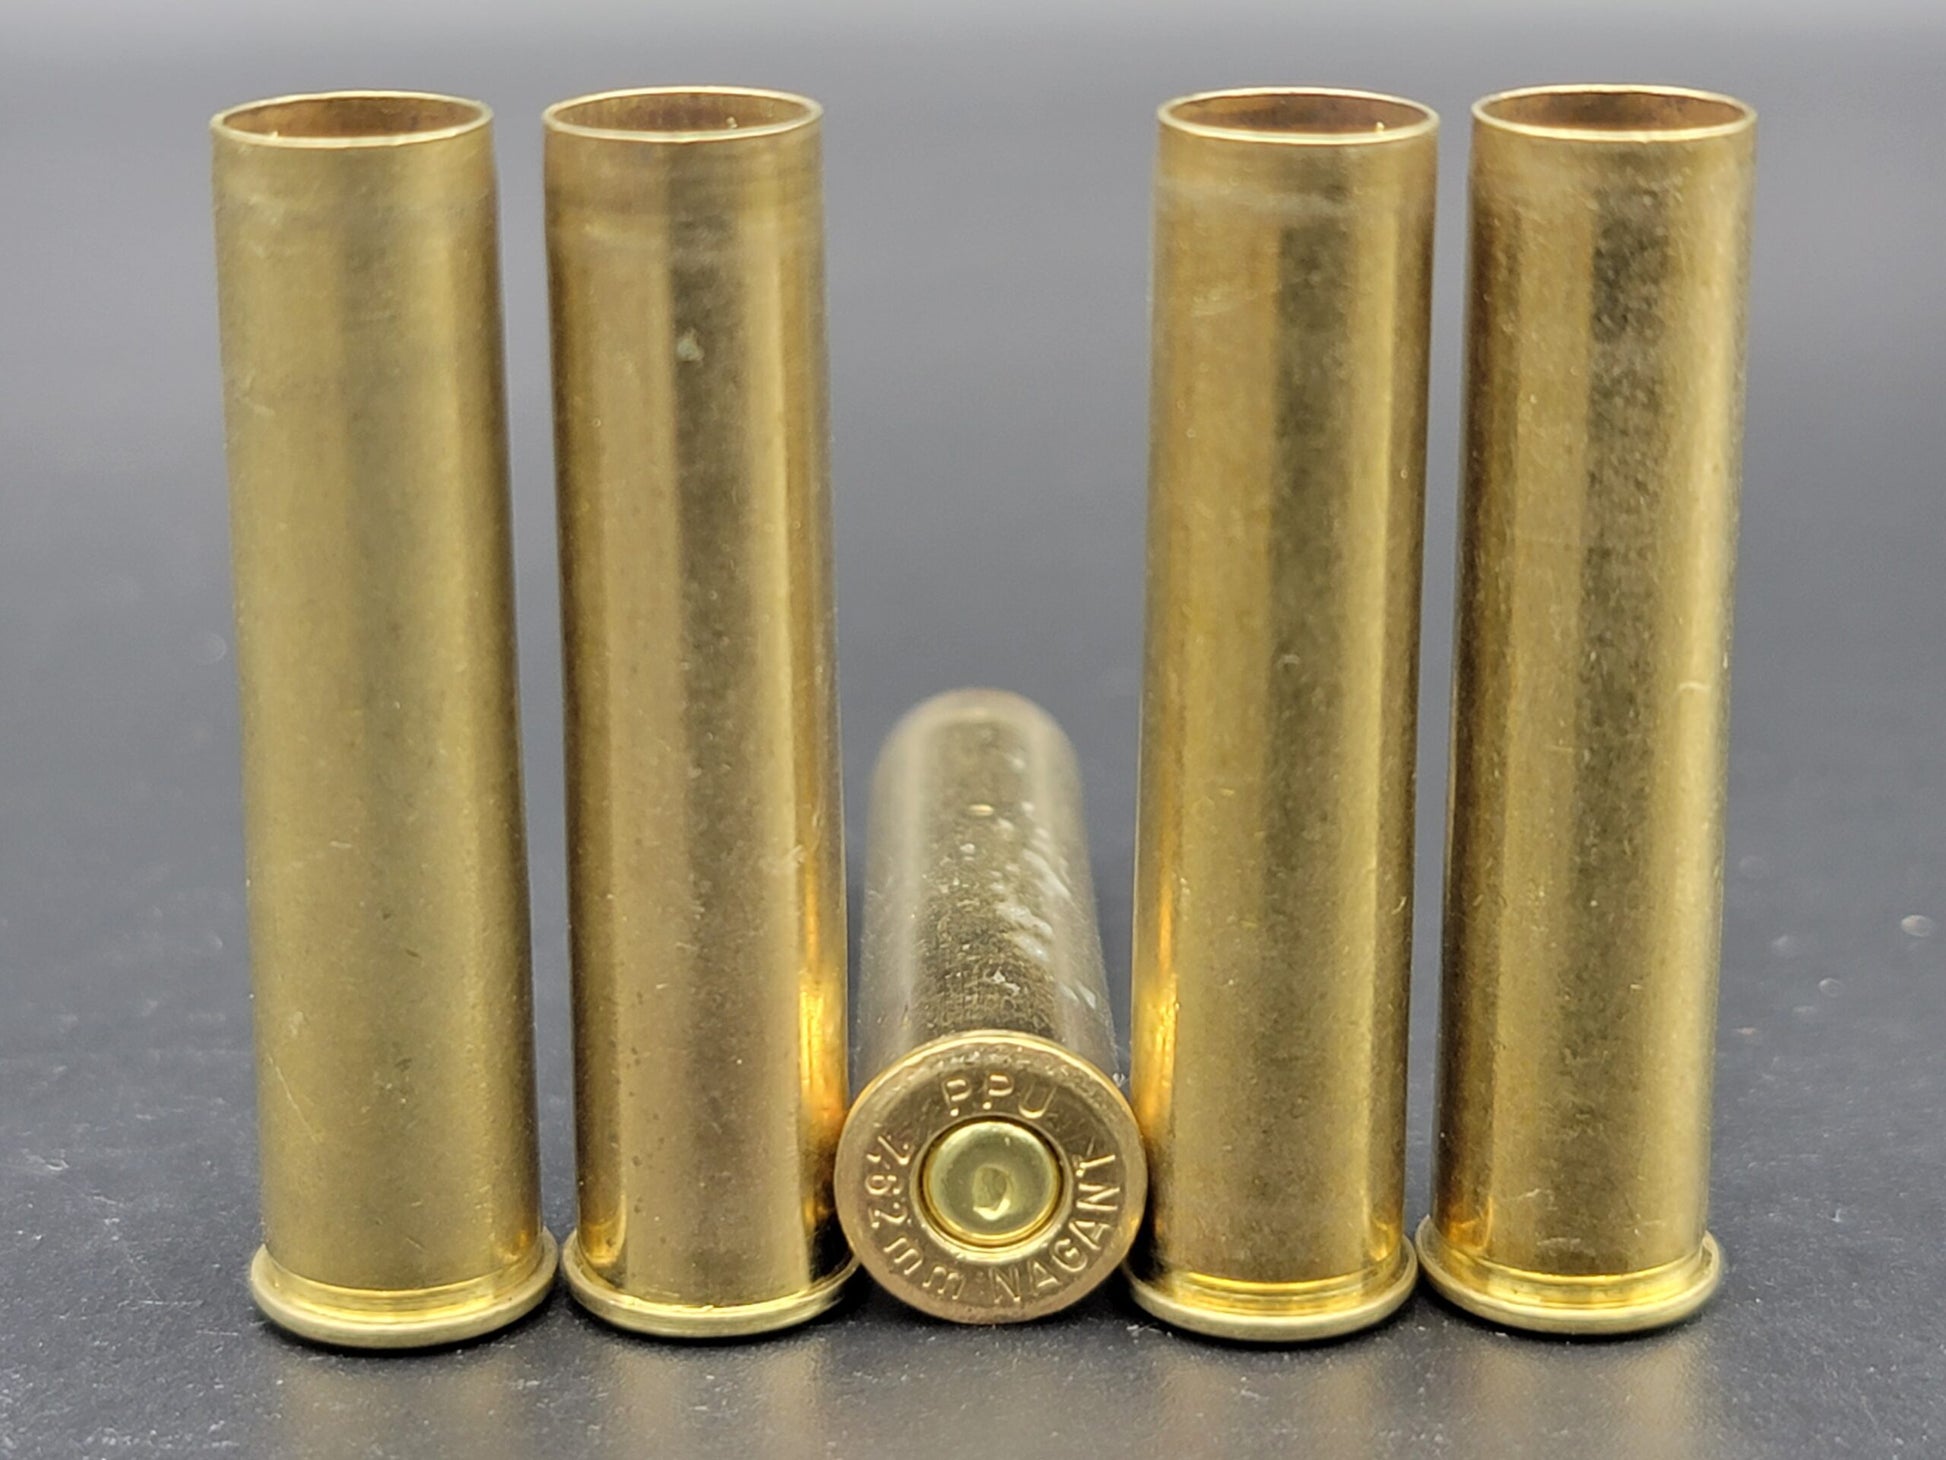 7.62 Russian Nagant once fired pistol brass. Hand sorted from reputable indoor/military ranges for reloading. Reliable spent casings for precision shooting.